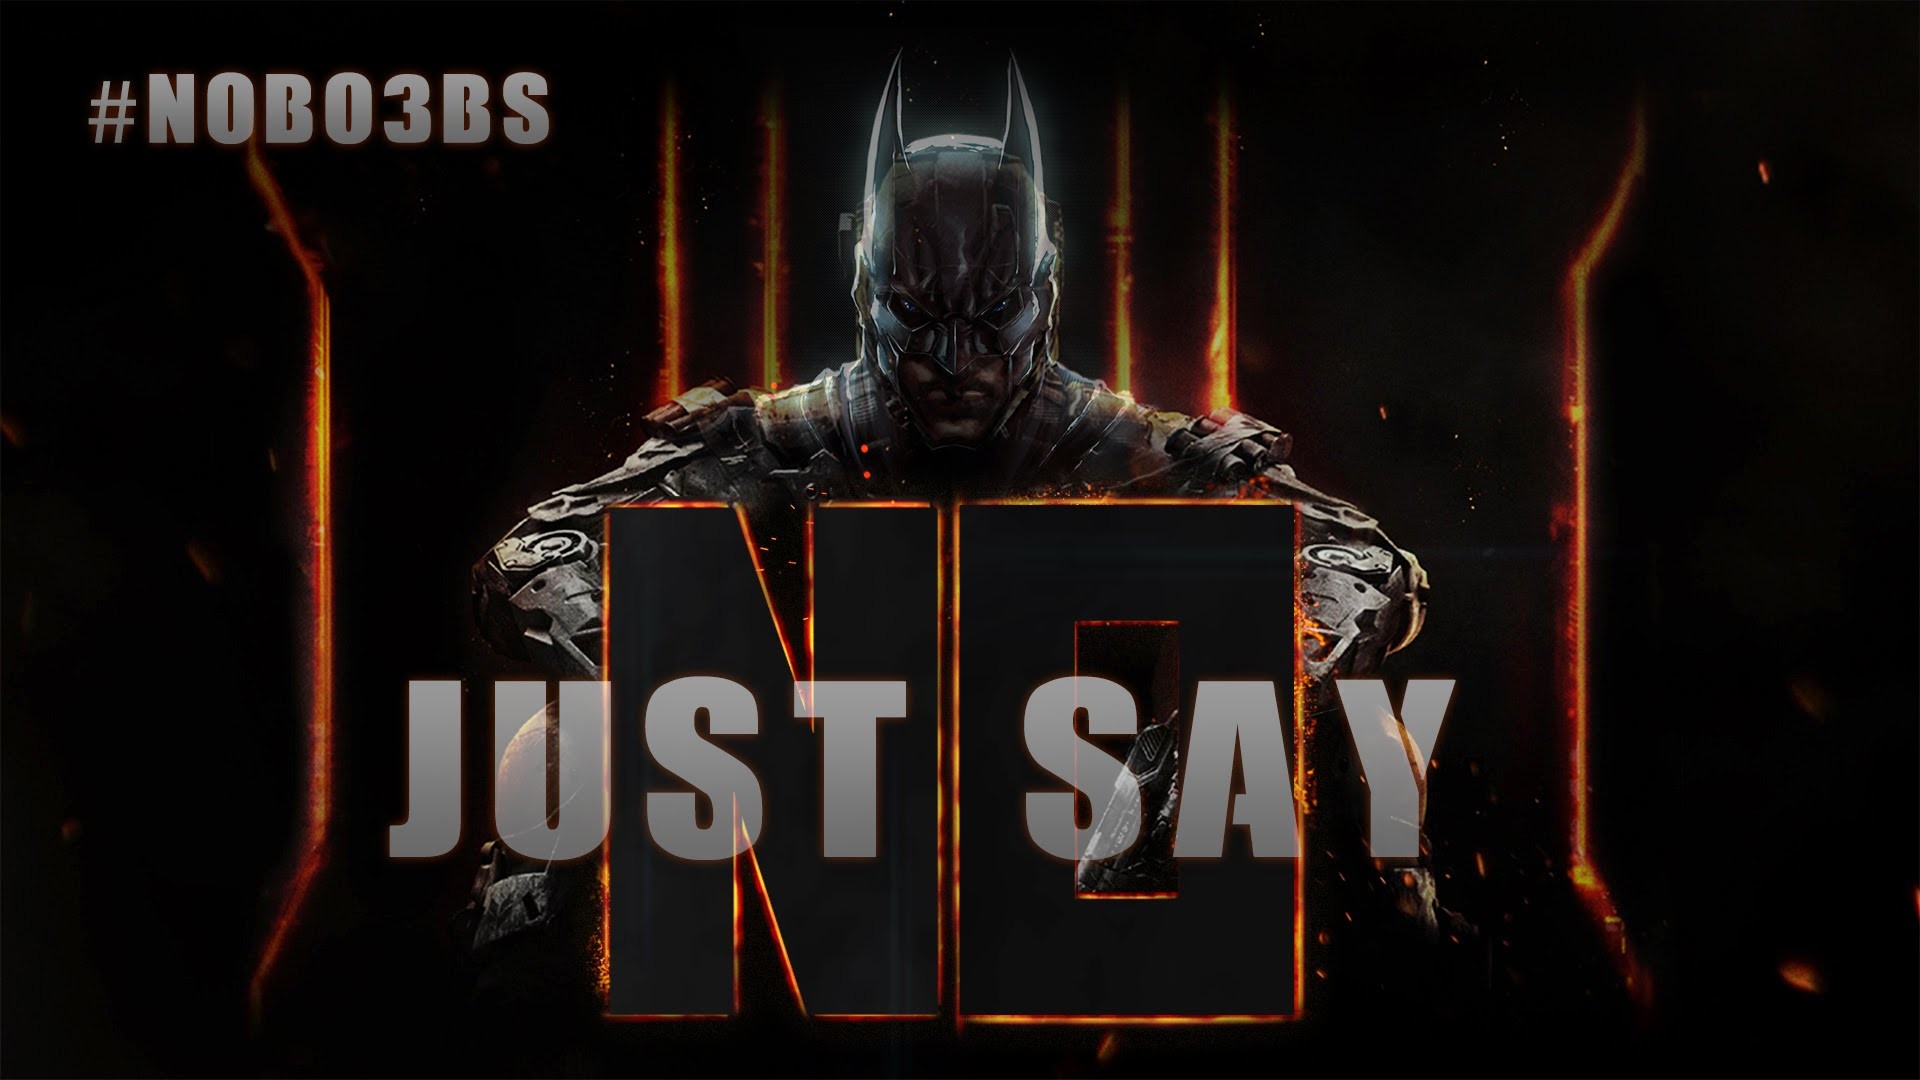 1920x1080 How To Make Black Ops 3 Better By Not Buying BO3 Multiplayer BS #NoBo3BS -  YouTube